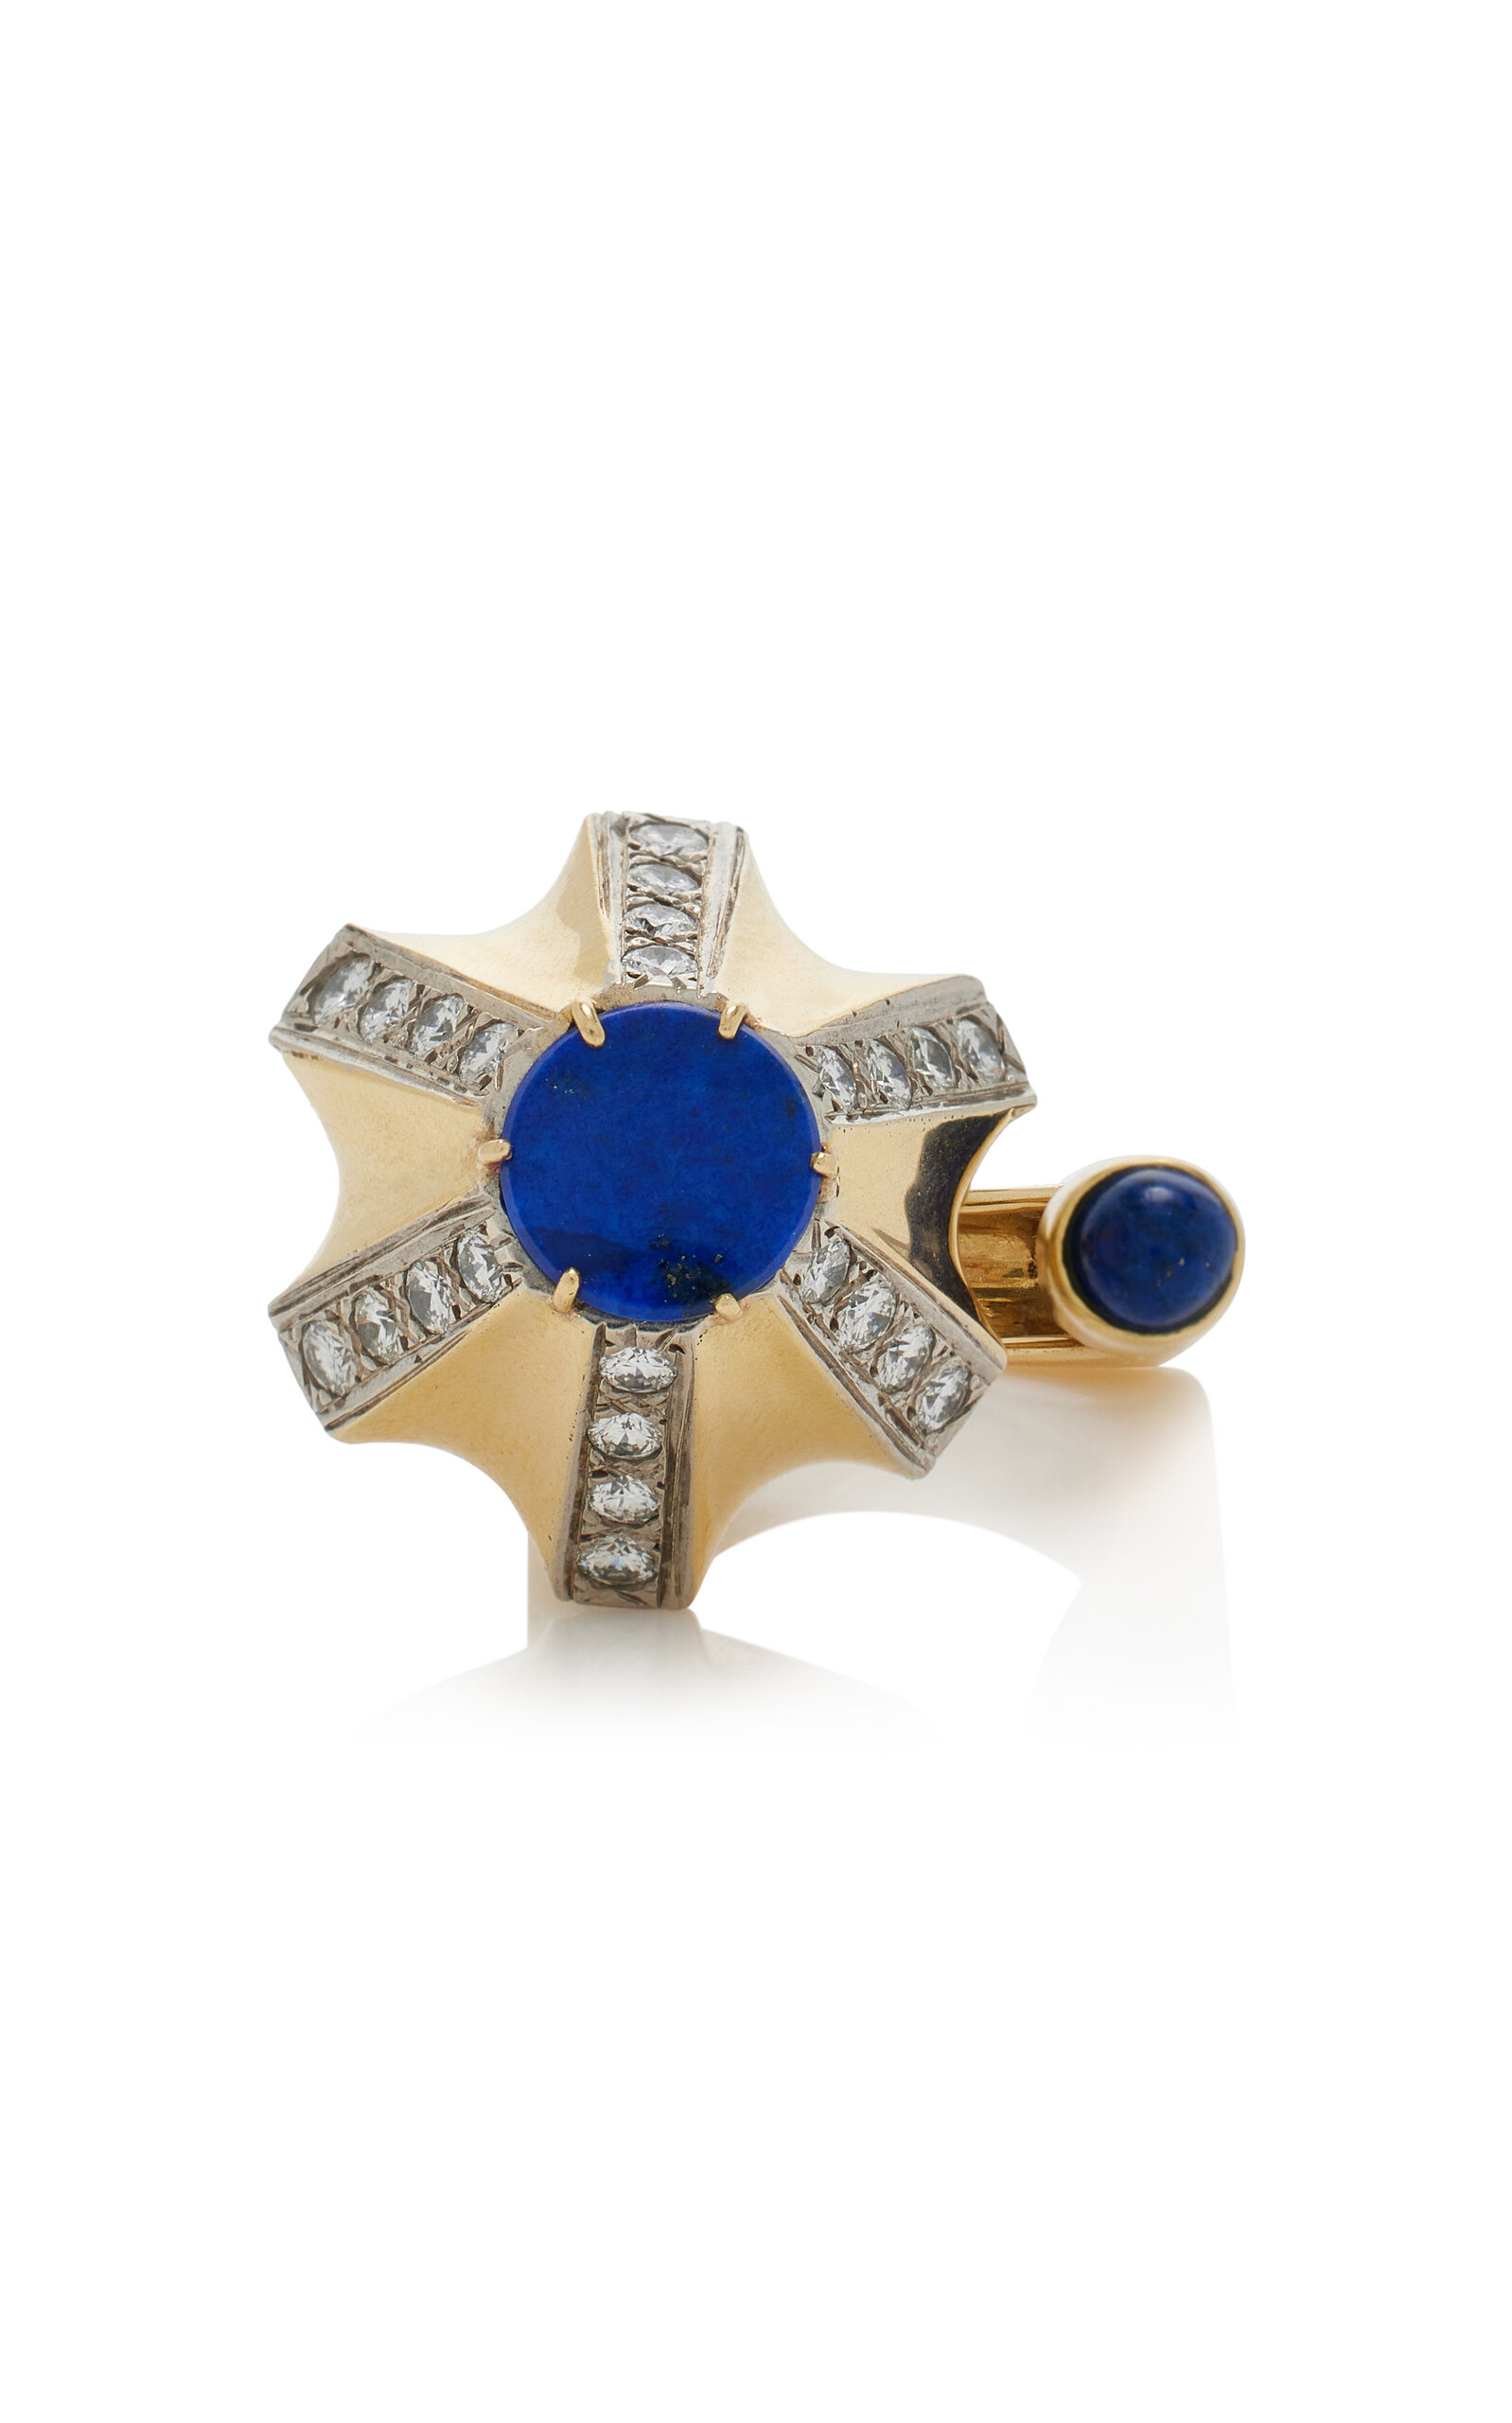 One-of-a-Kind Dinh Van for Cartier 18K Yellow Gold Lapis; Diamond Ring